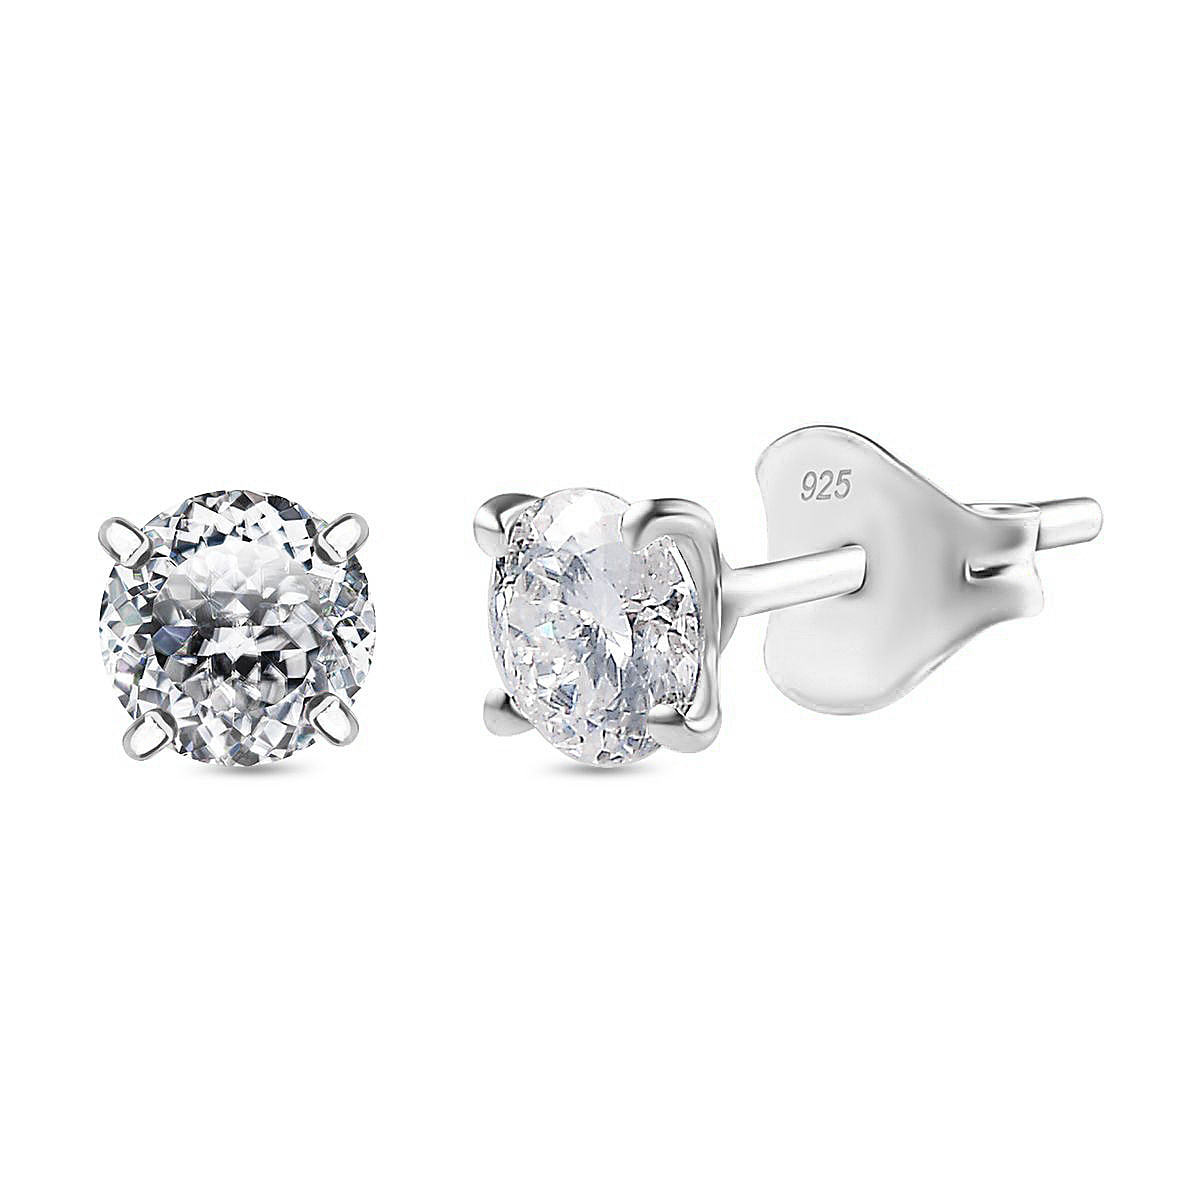 Moissanite Solitaire Stud Earrings in Rhodium Overlay Sterling Silver 1.00 Ct.